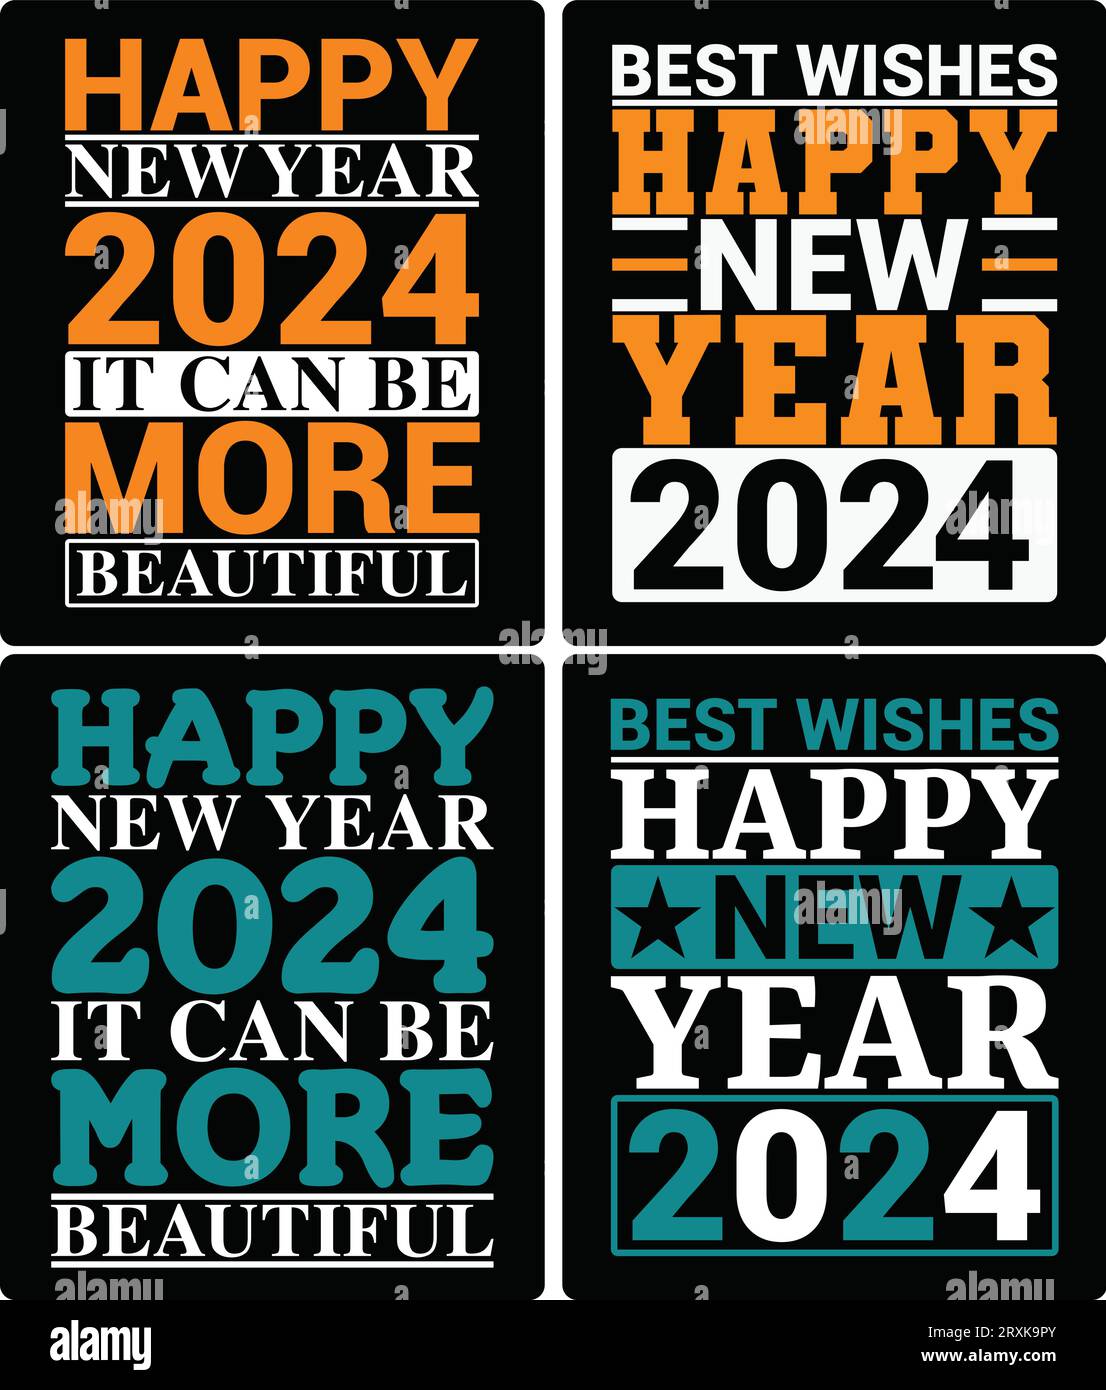 HAPPY NEW YERK 2024 T SHIRT DESIGN.. if you want you can use it for other purpose like mug design, sticker design, water bottle design and etc Stock Vector